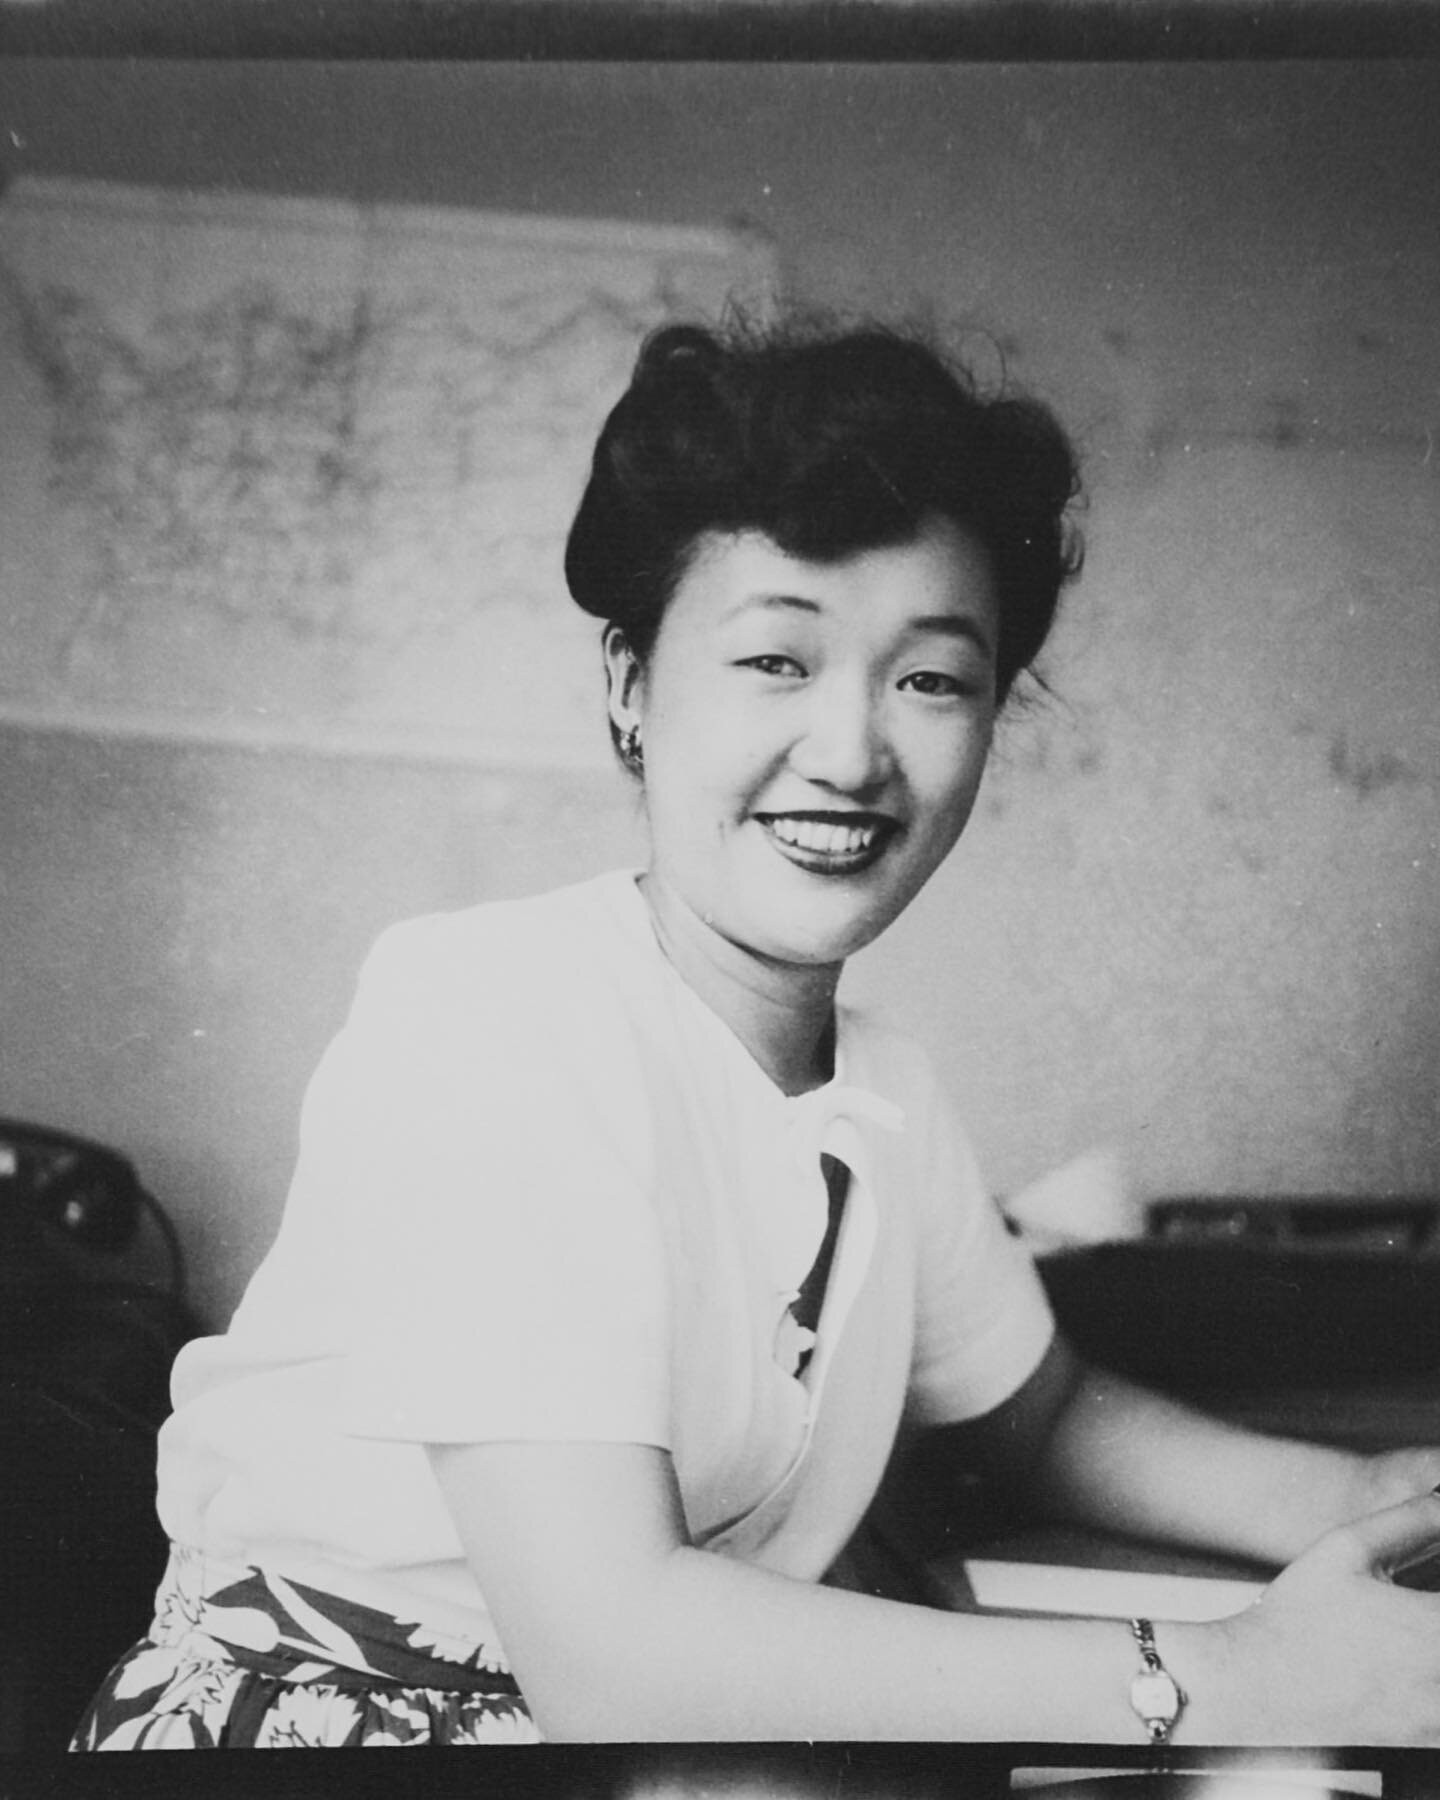 Our Grammy. My namesake. Katherine Aiko Kageyama Matsuki. She lived to be 101 years old. She was born on February 19th, which is now shared with the Day of Remembrance for the incarceration of Japanese Americans during World War II. She taught us kin